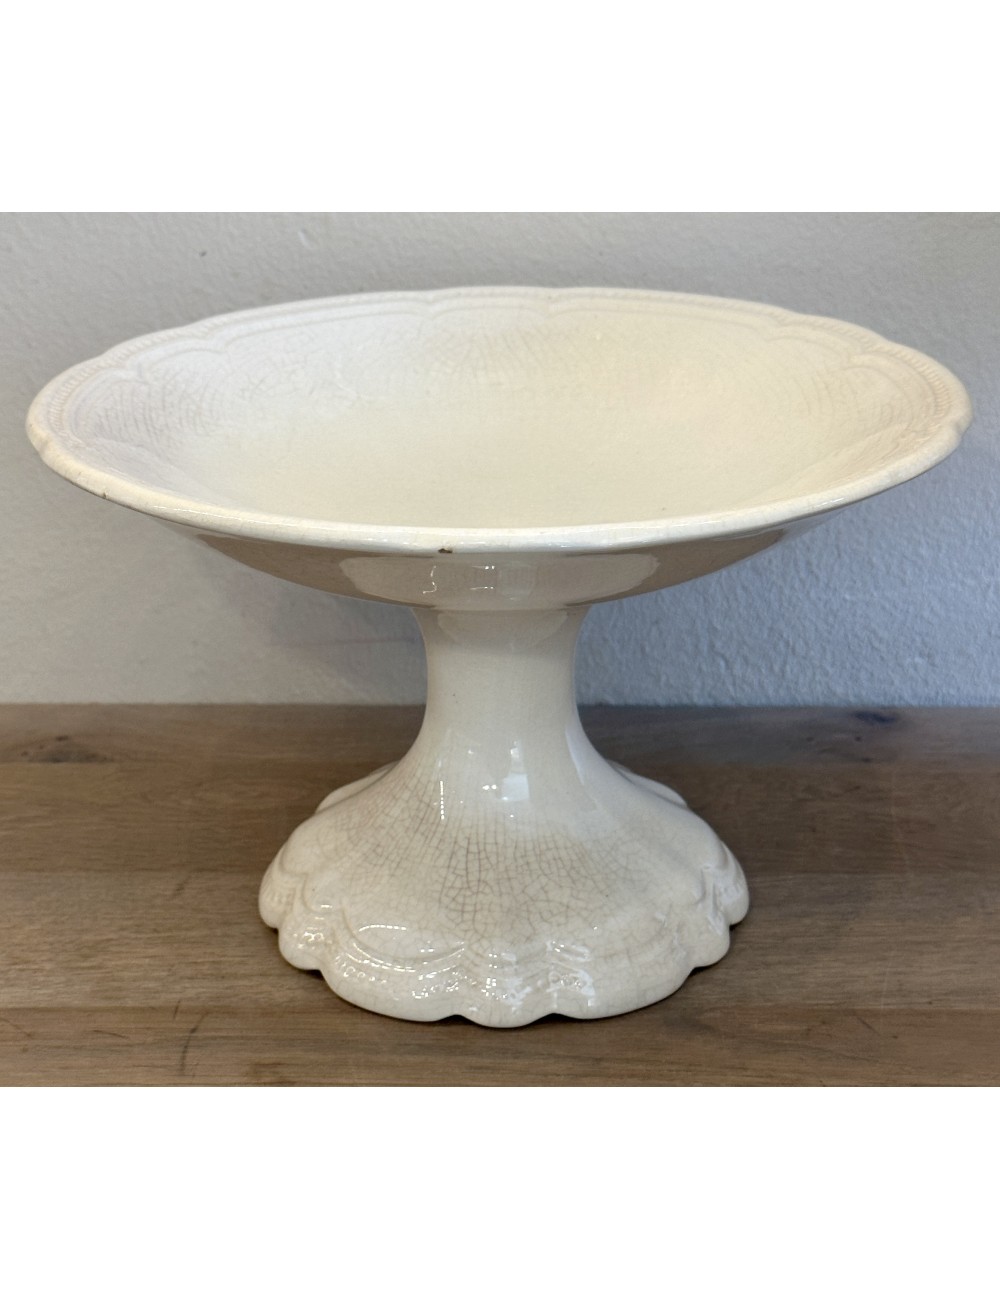 Tazza / Plate on foot - Boch - executed in white with scalloped pearl edge